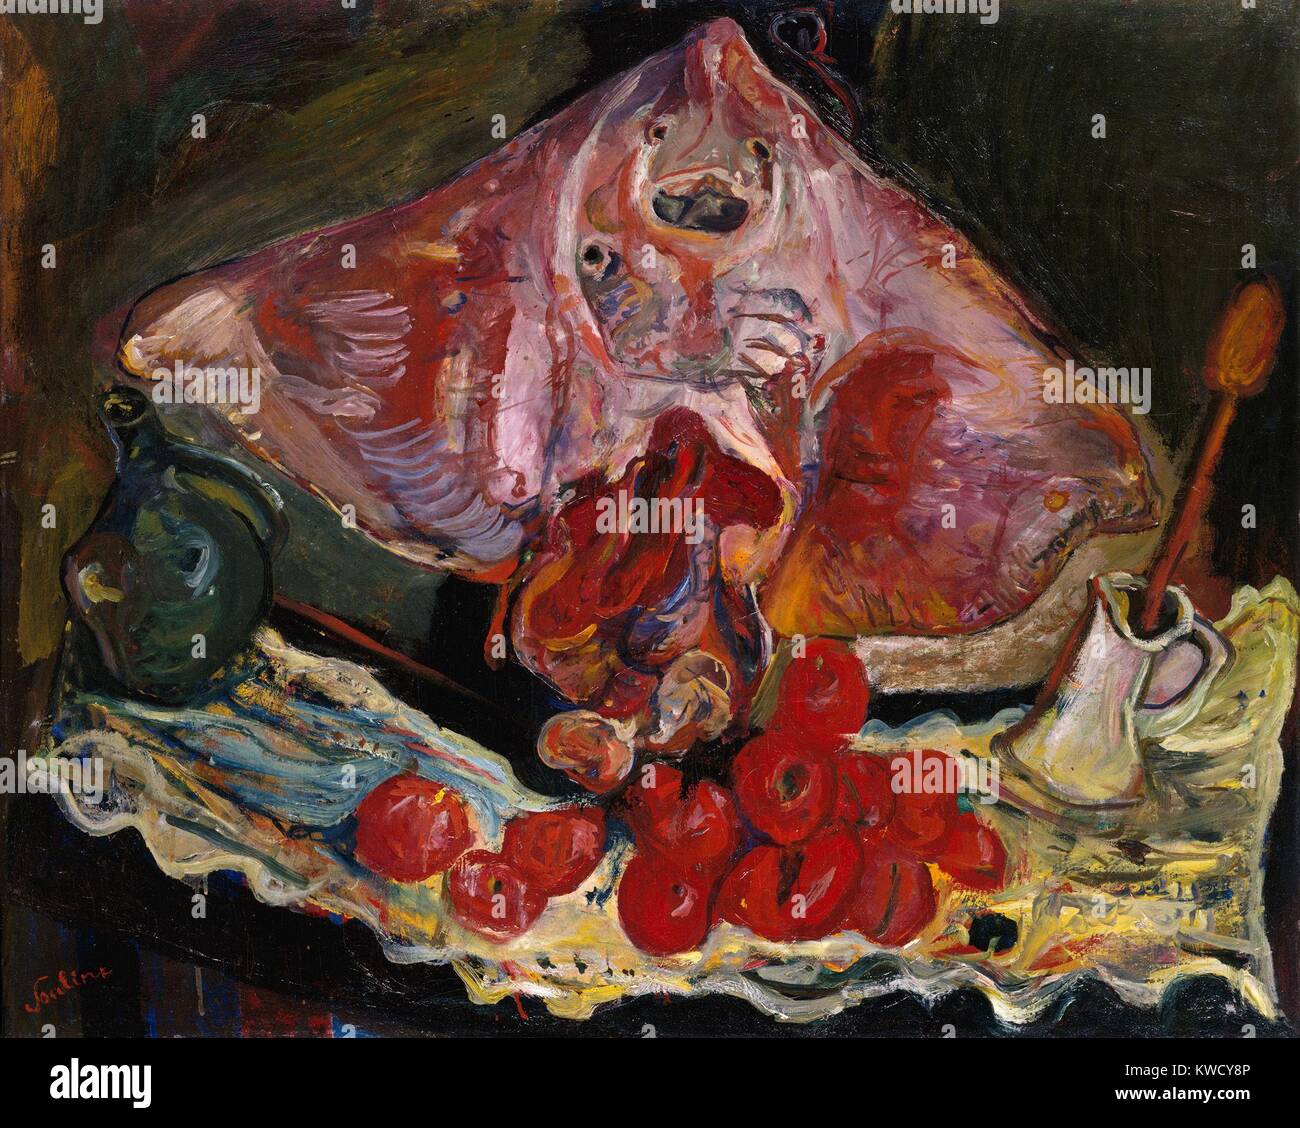 Still Life with Rayfish, by Chaim Soutine, 1924, Russian French Expressionist oil painting. In this canvas, Soutine referenced Chardins The Rayfish of the 18th century. He painted the dead animal with thick, fluid brushstrokes in a still life with a dr (BSLOC 2017 5 151) Stock Photo